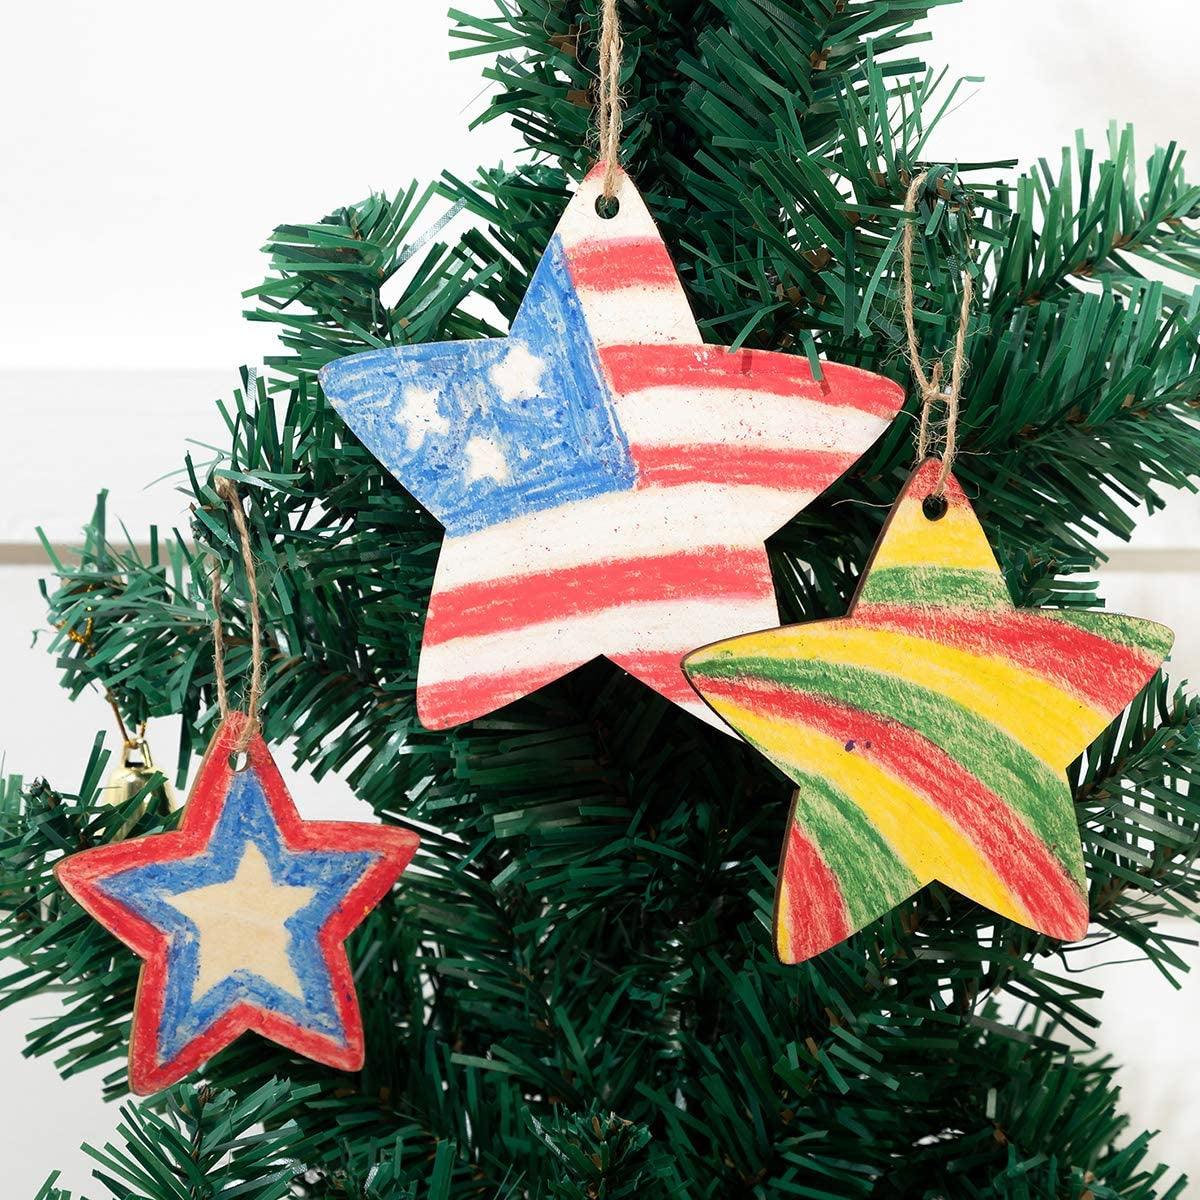 30 Pack Stars Shape Unfinished Wood Ornaments Big Blank Slices DIY Crafts Wooden Cutout with Hemp Rope for Craft DIY 4.72 In - WoodArtSupply